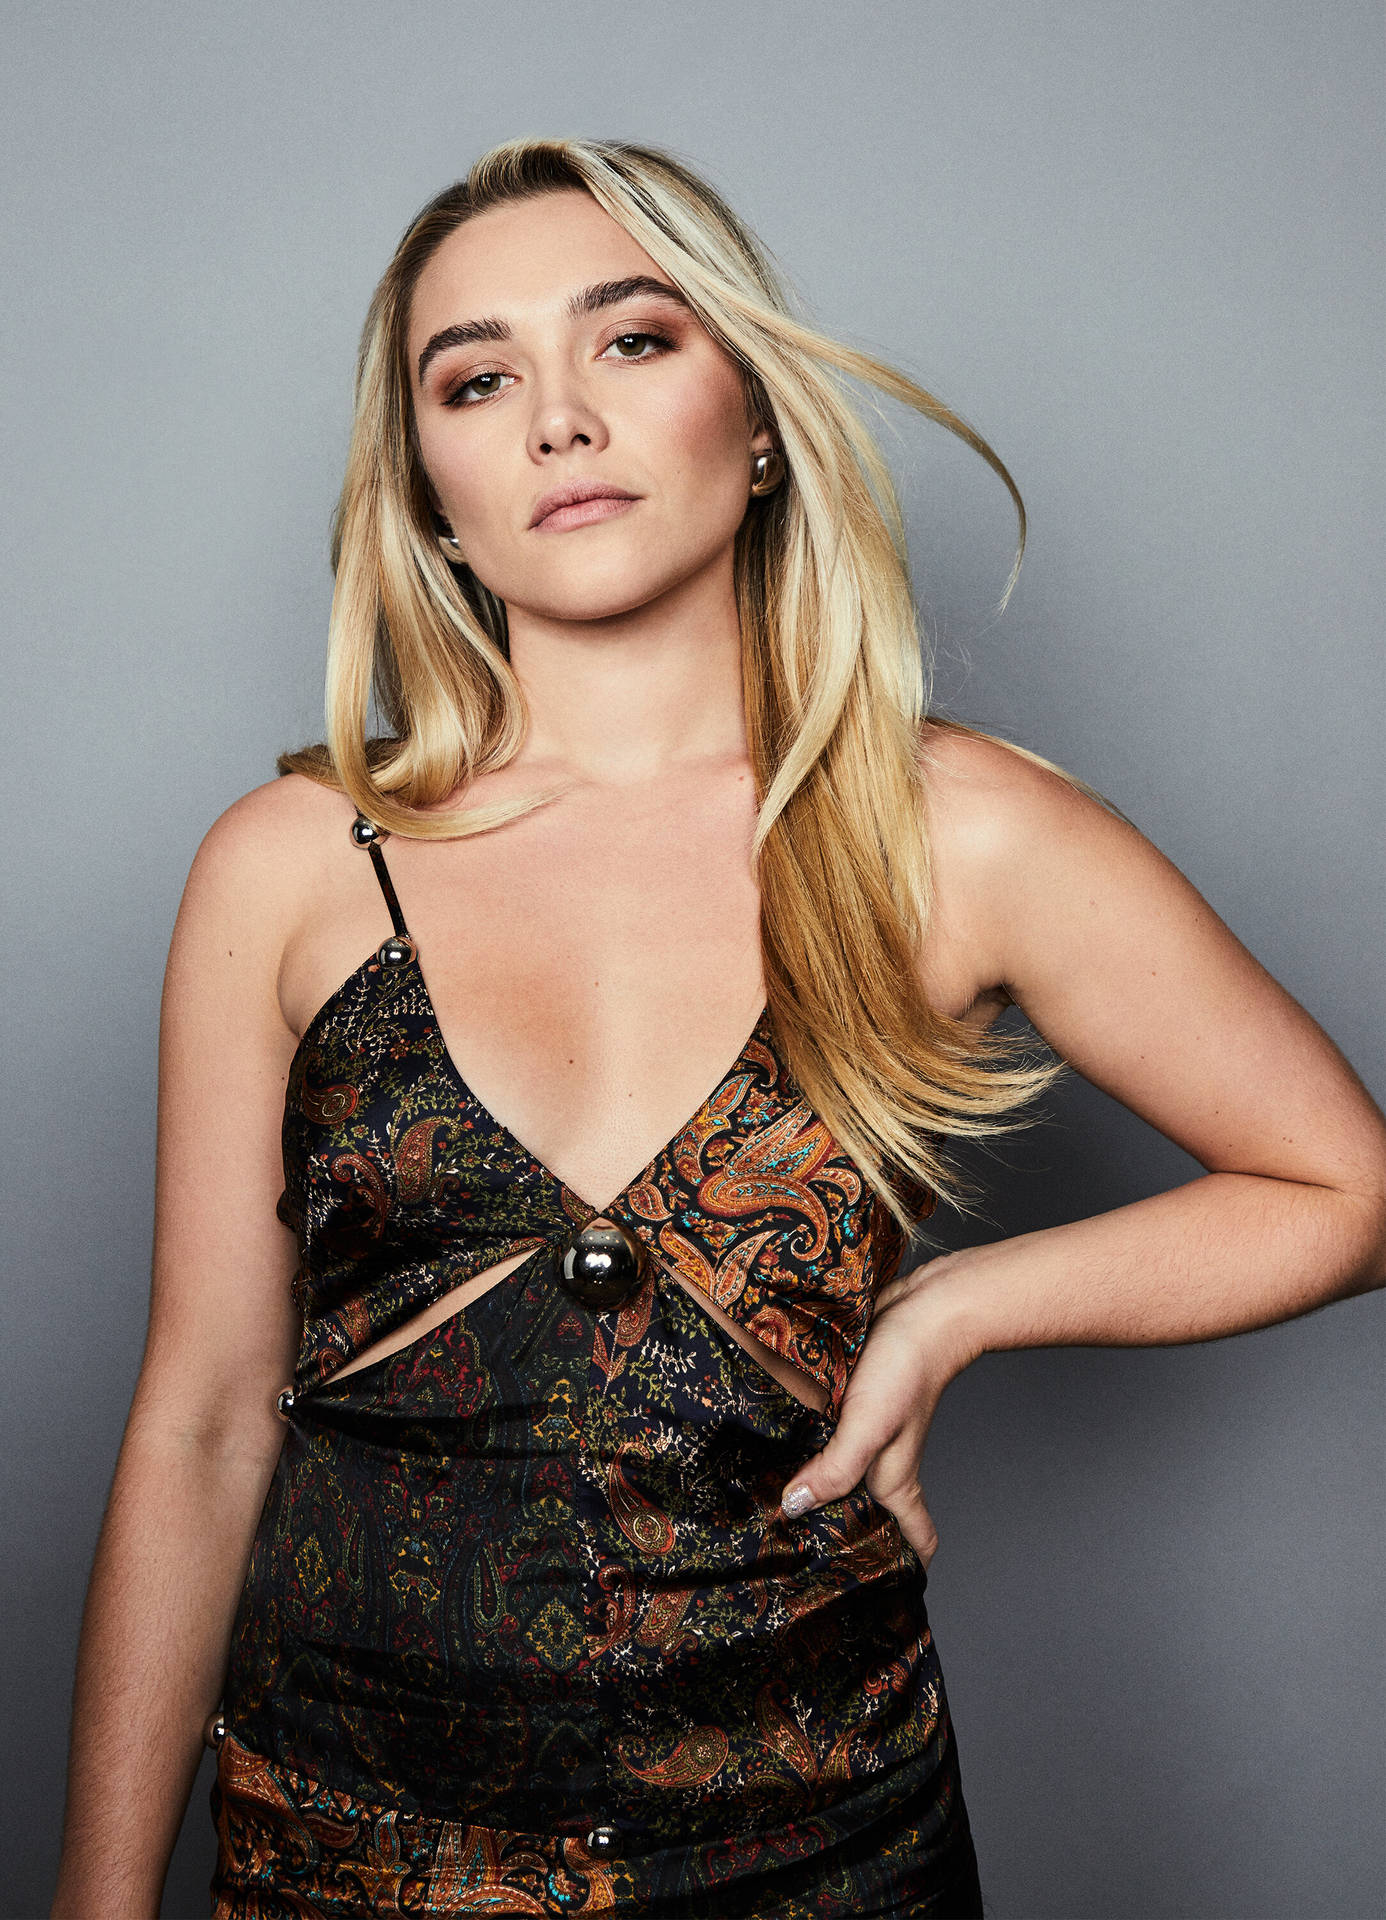 Florence Pugh striking a pose at The Wrap event Wallpaper